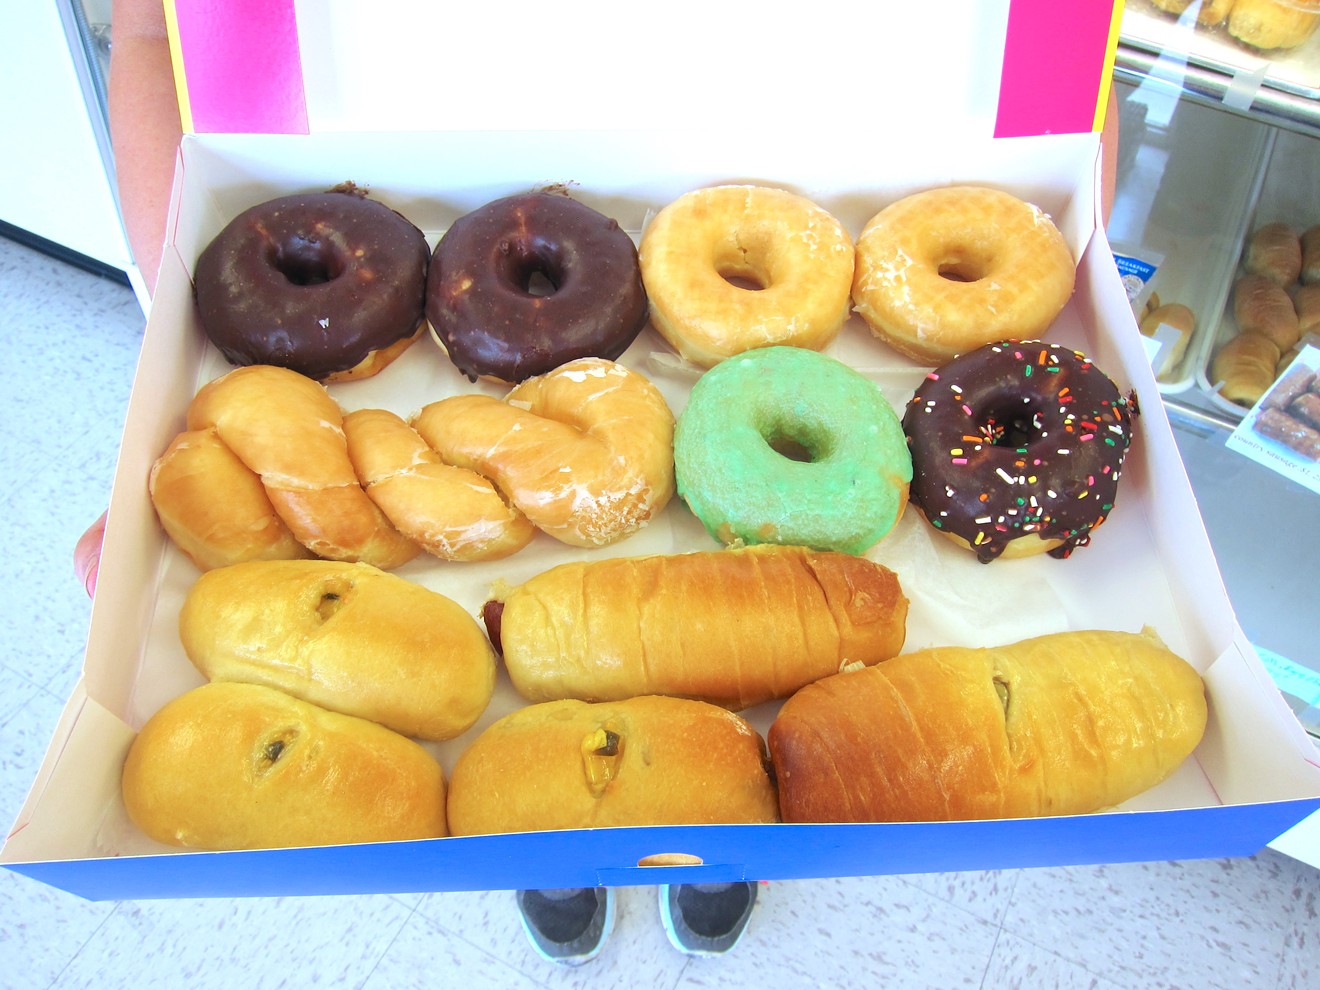 A selection of doughnuts and kolaches from Richmond Donuts.